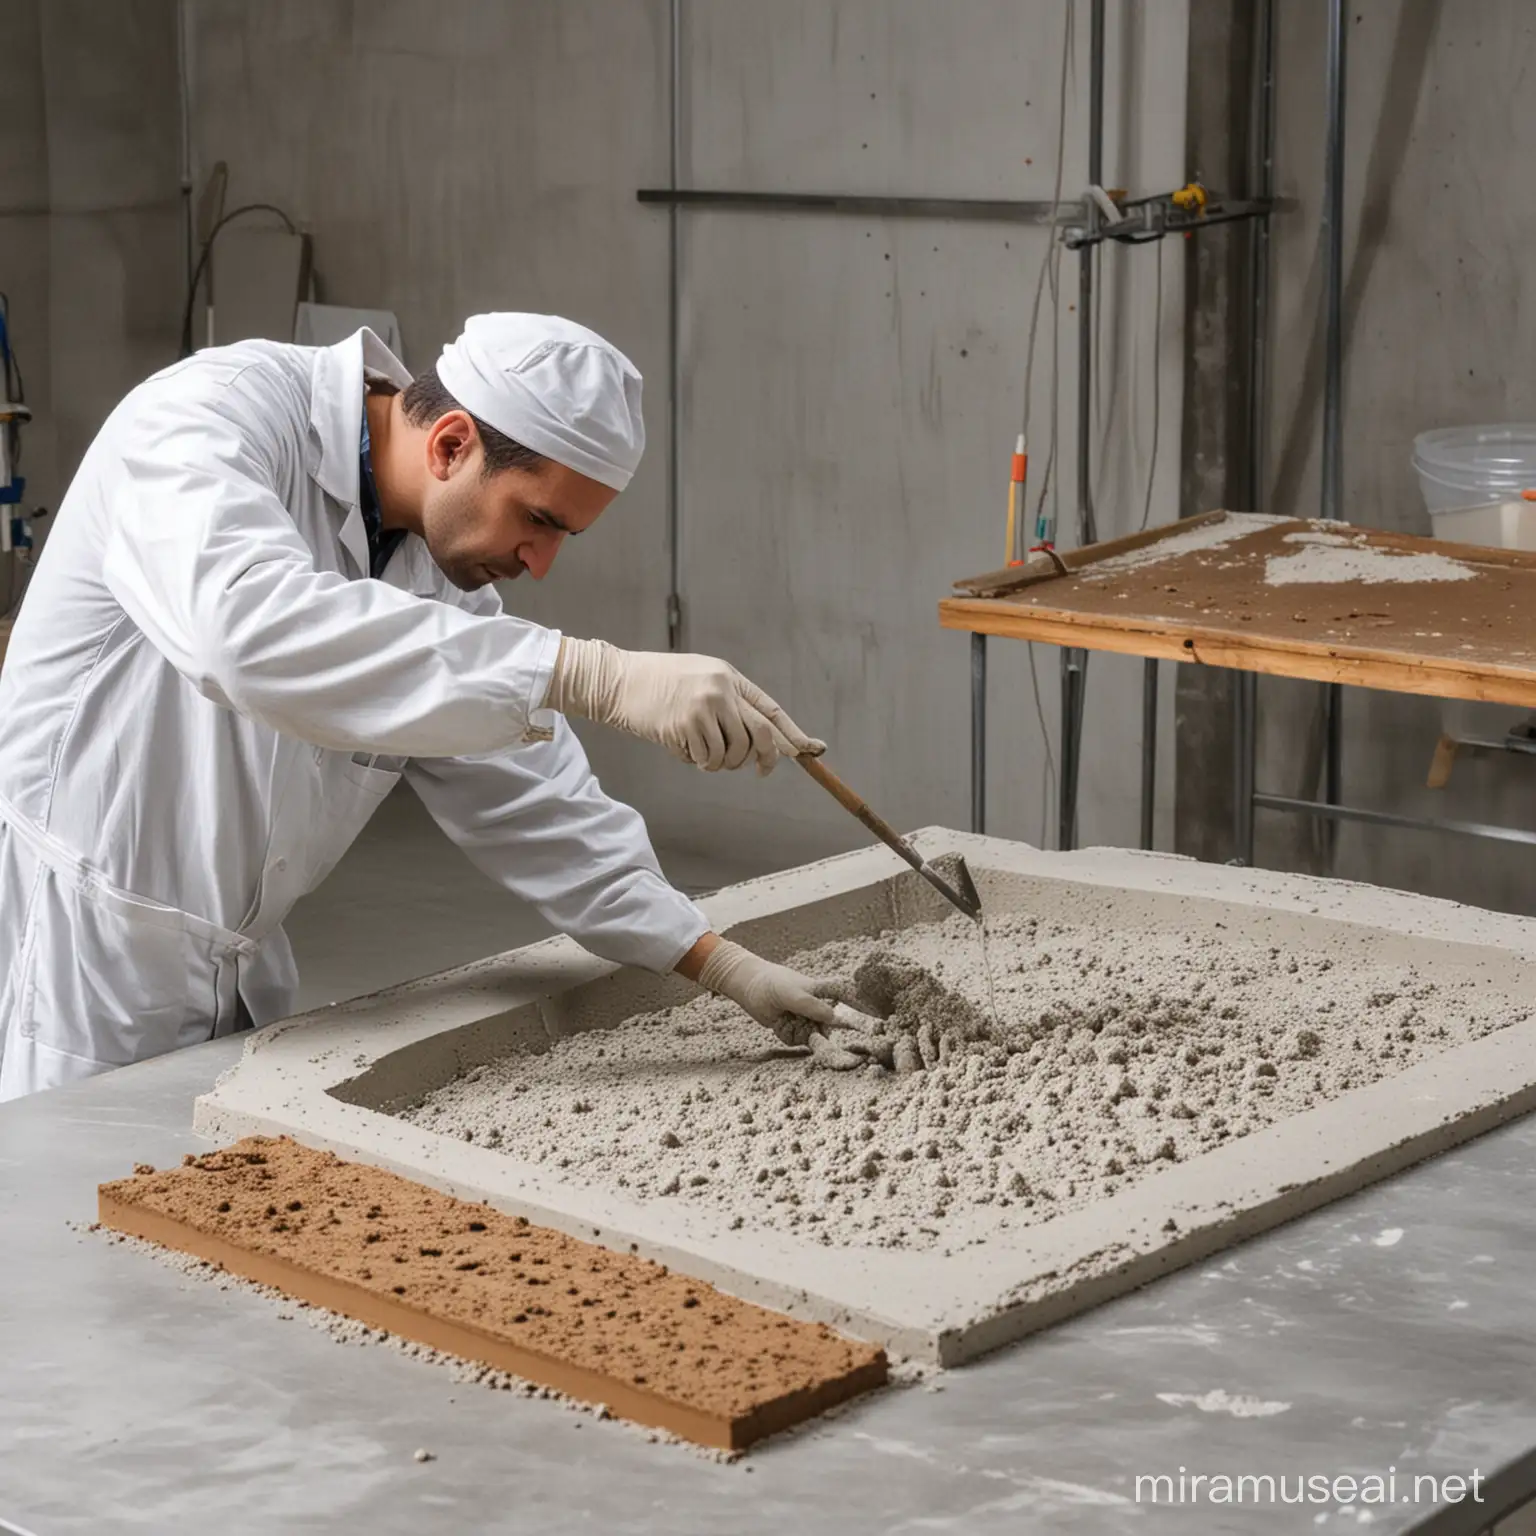 EcoConcrete Manufacturing Process in Laboratory for Sustainable Construction